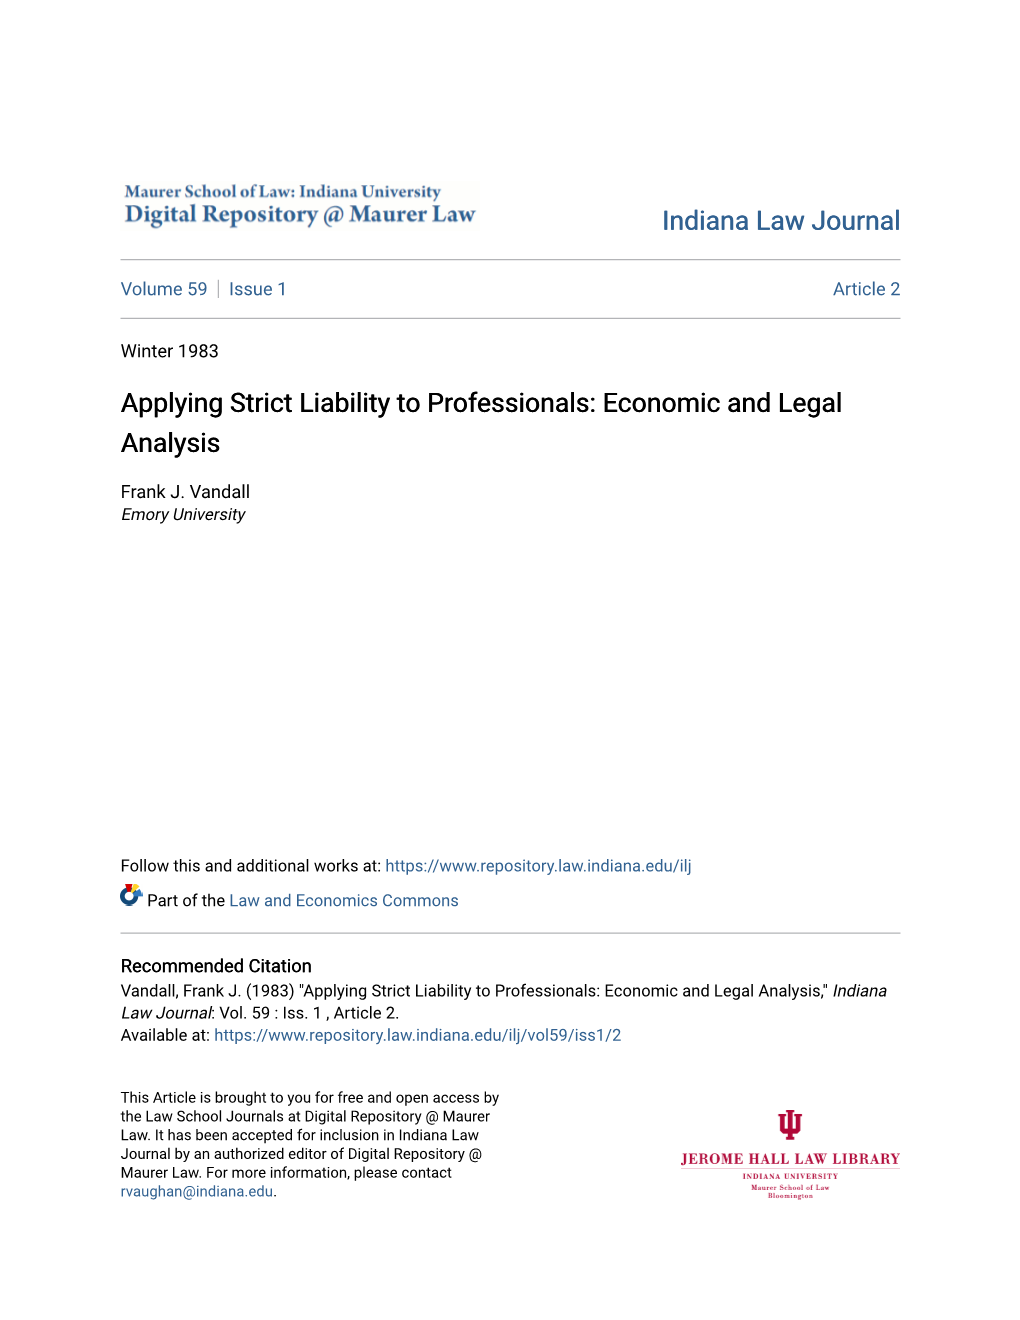 Applying Strict Liability to Professionals: Economic and Legal Analysis